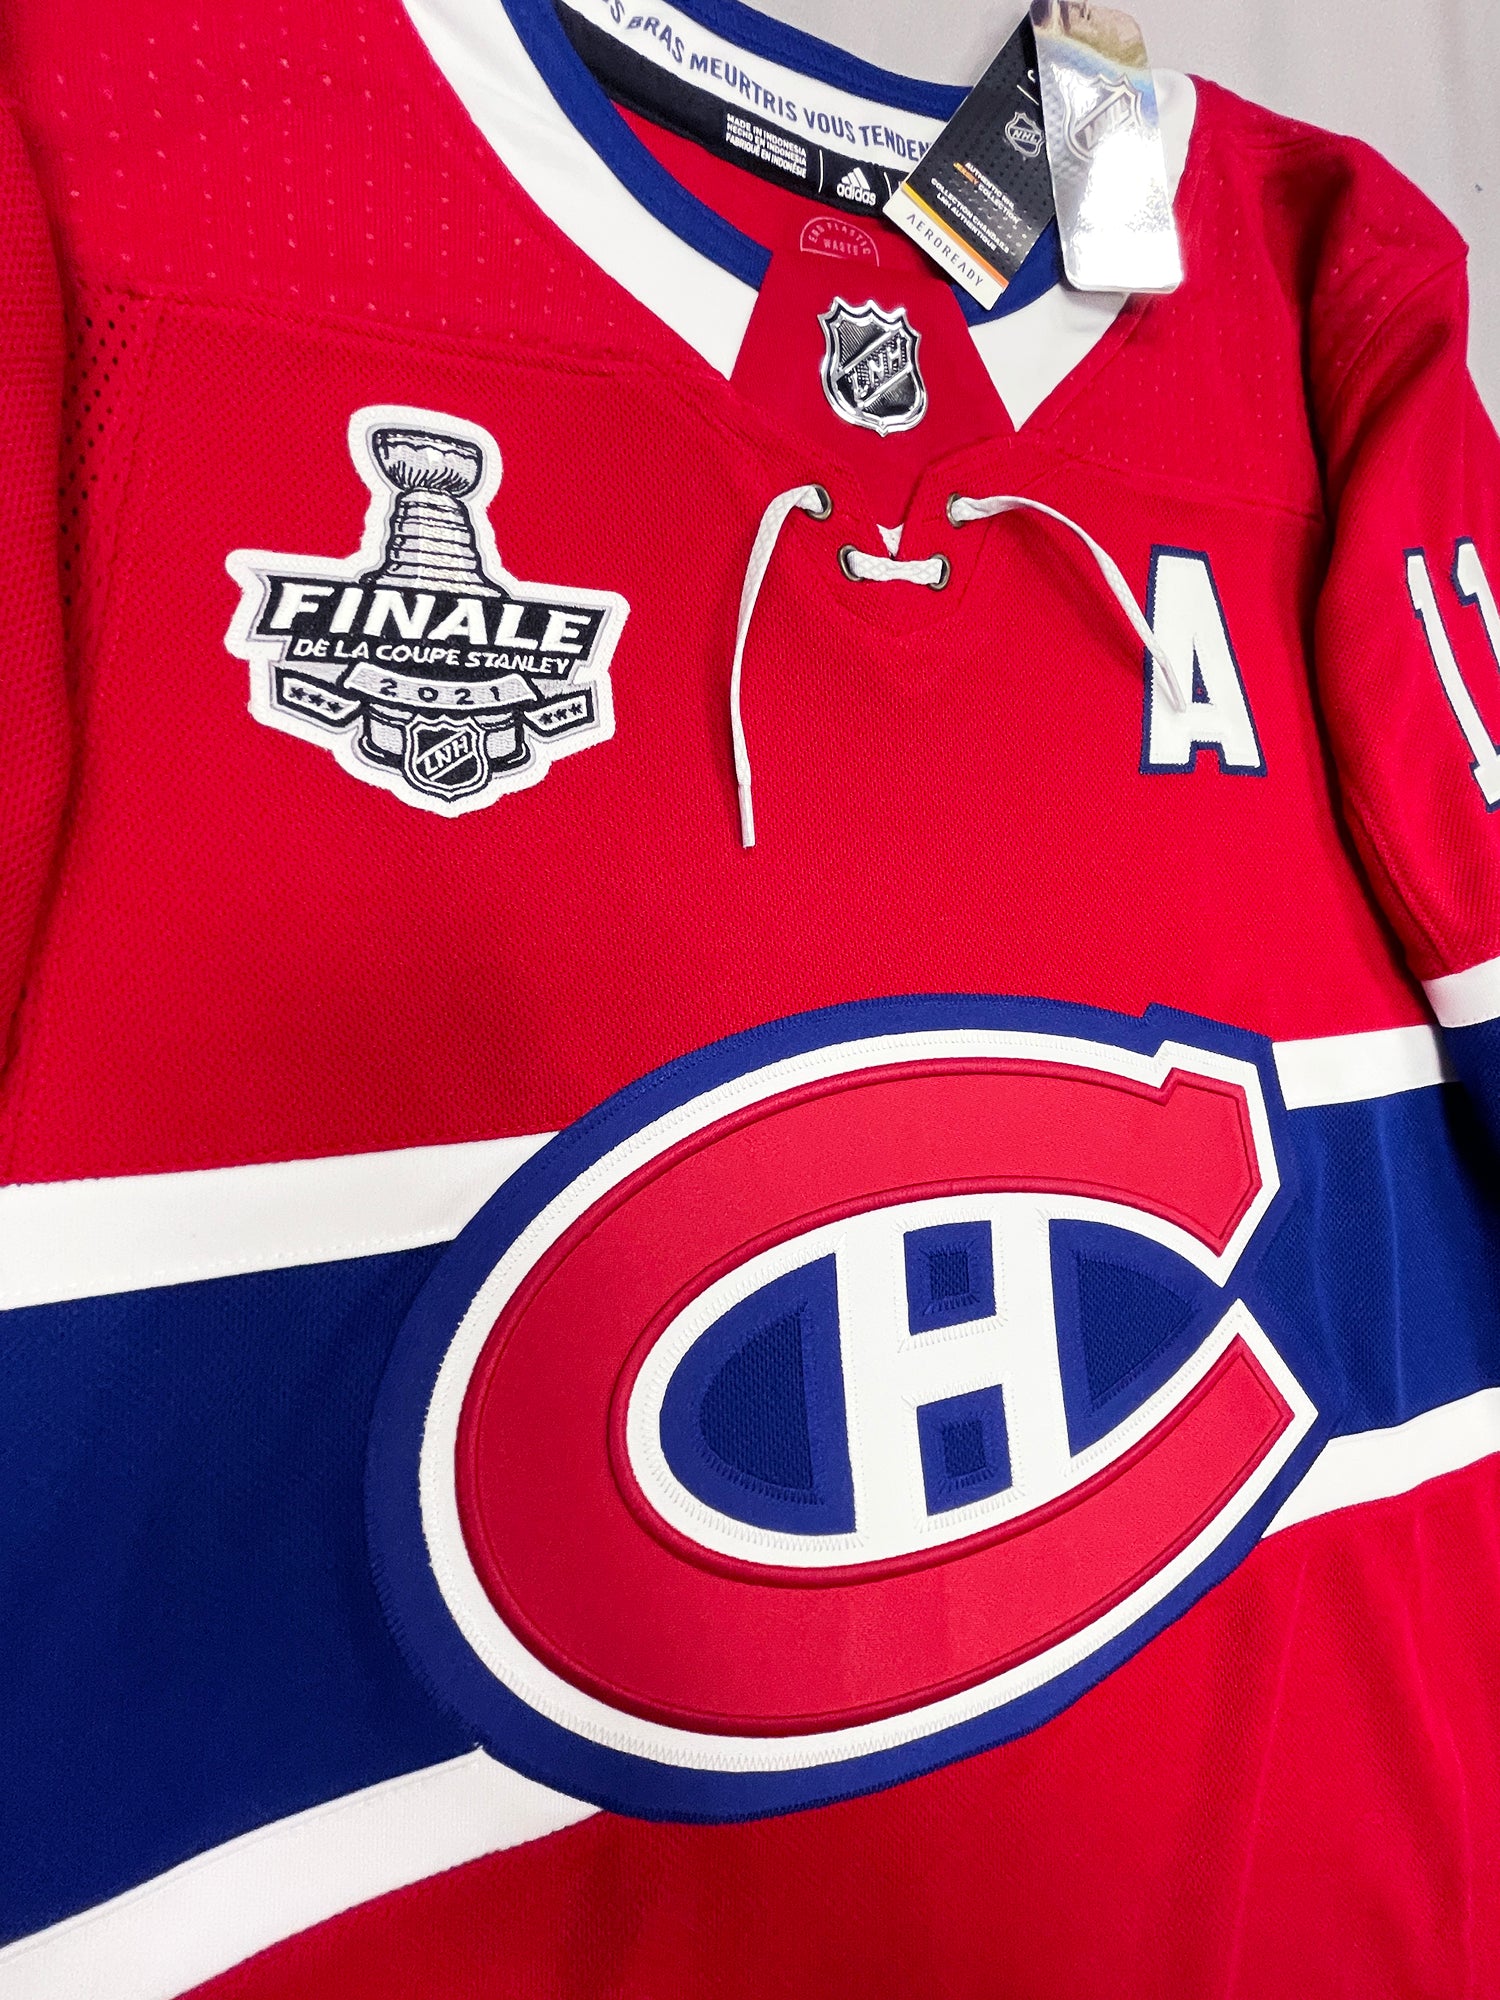 ANY NAME AND NUMBER MONTREAL CANADIENS HOME OR AWAY AUTHENTIC ADIDAS N –  Hockey Authentic